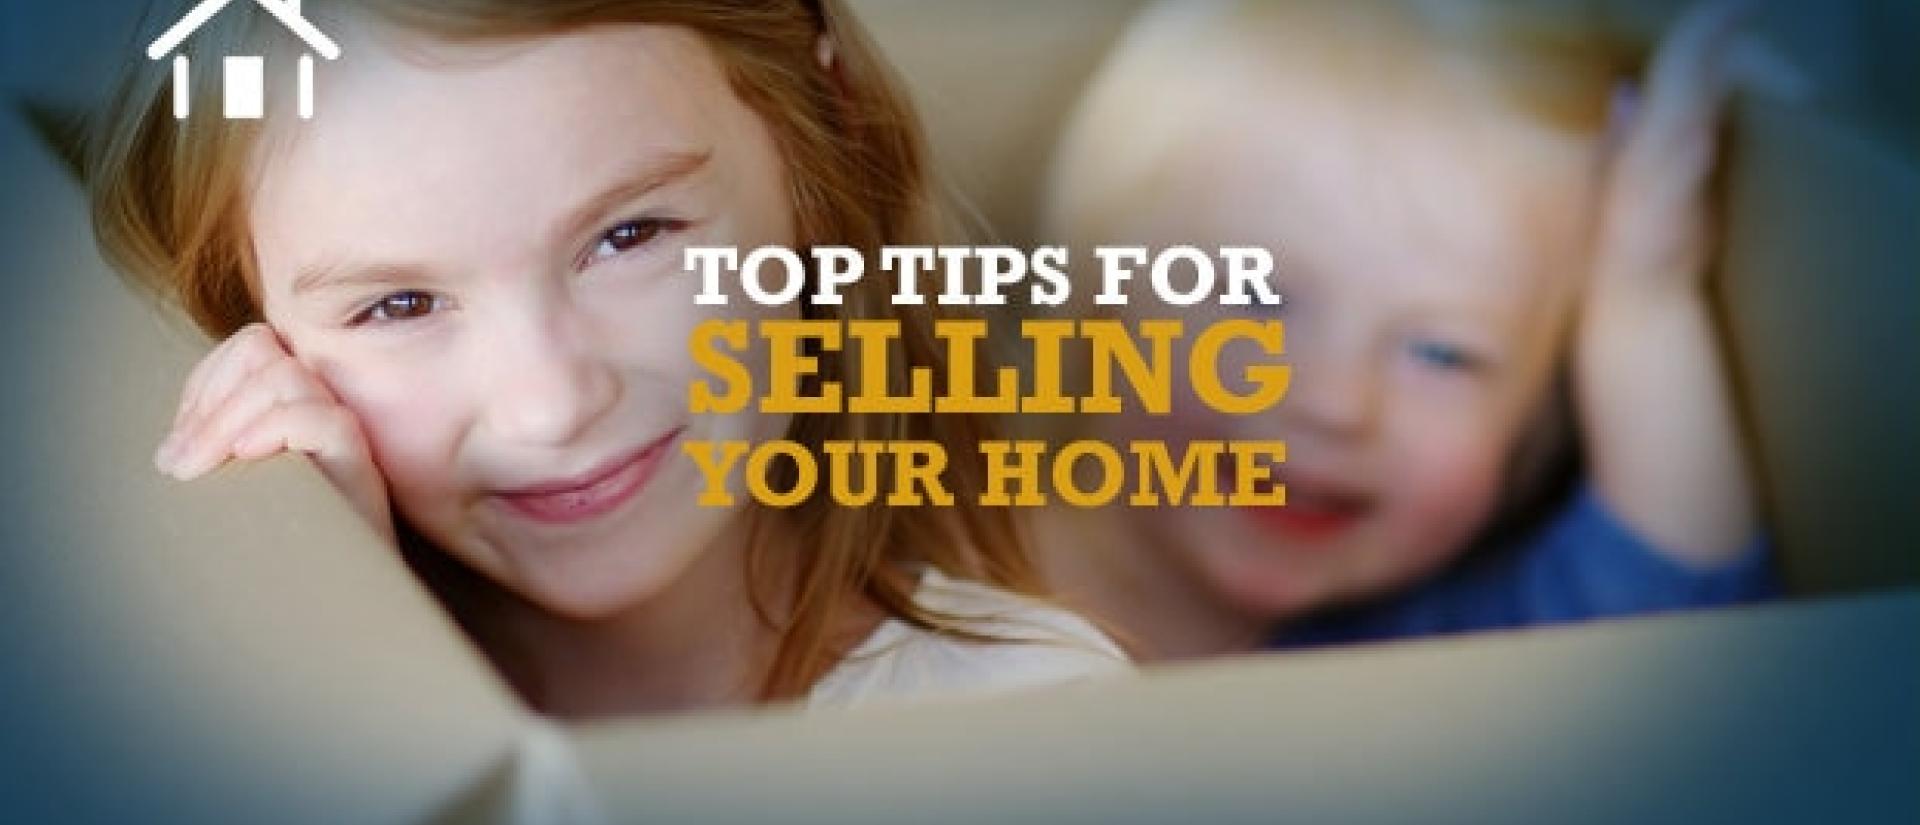 Top Tips for Selling a House in Ireland